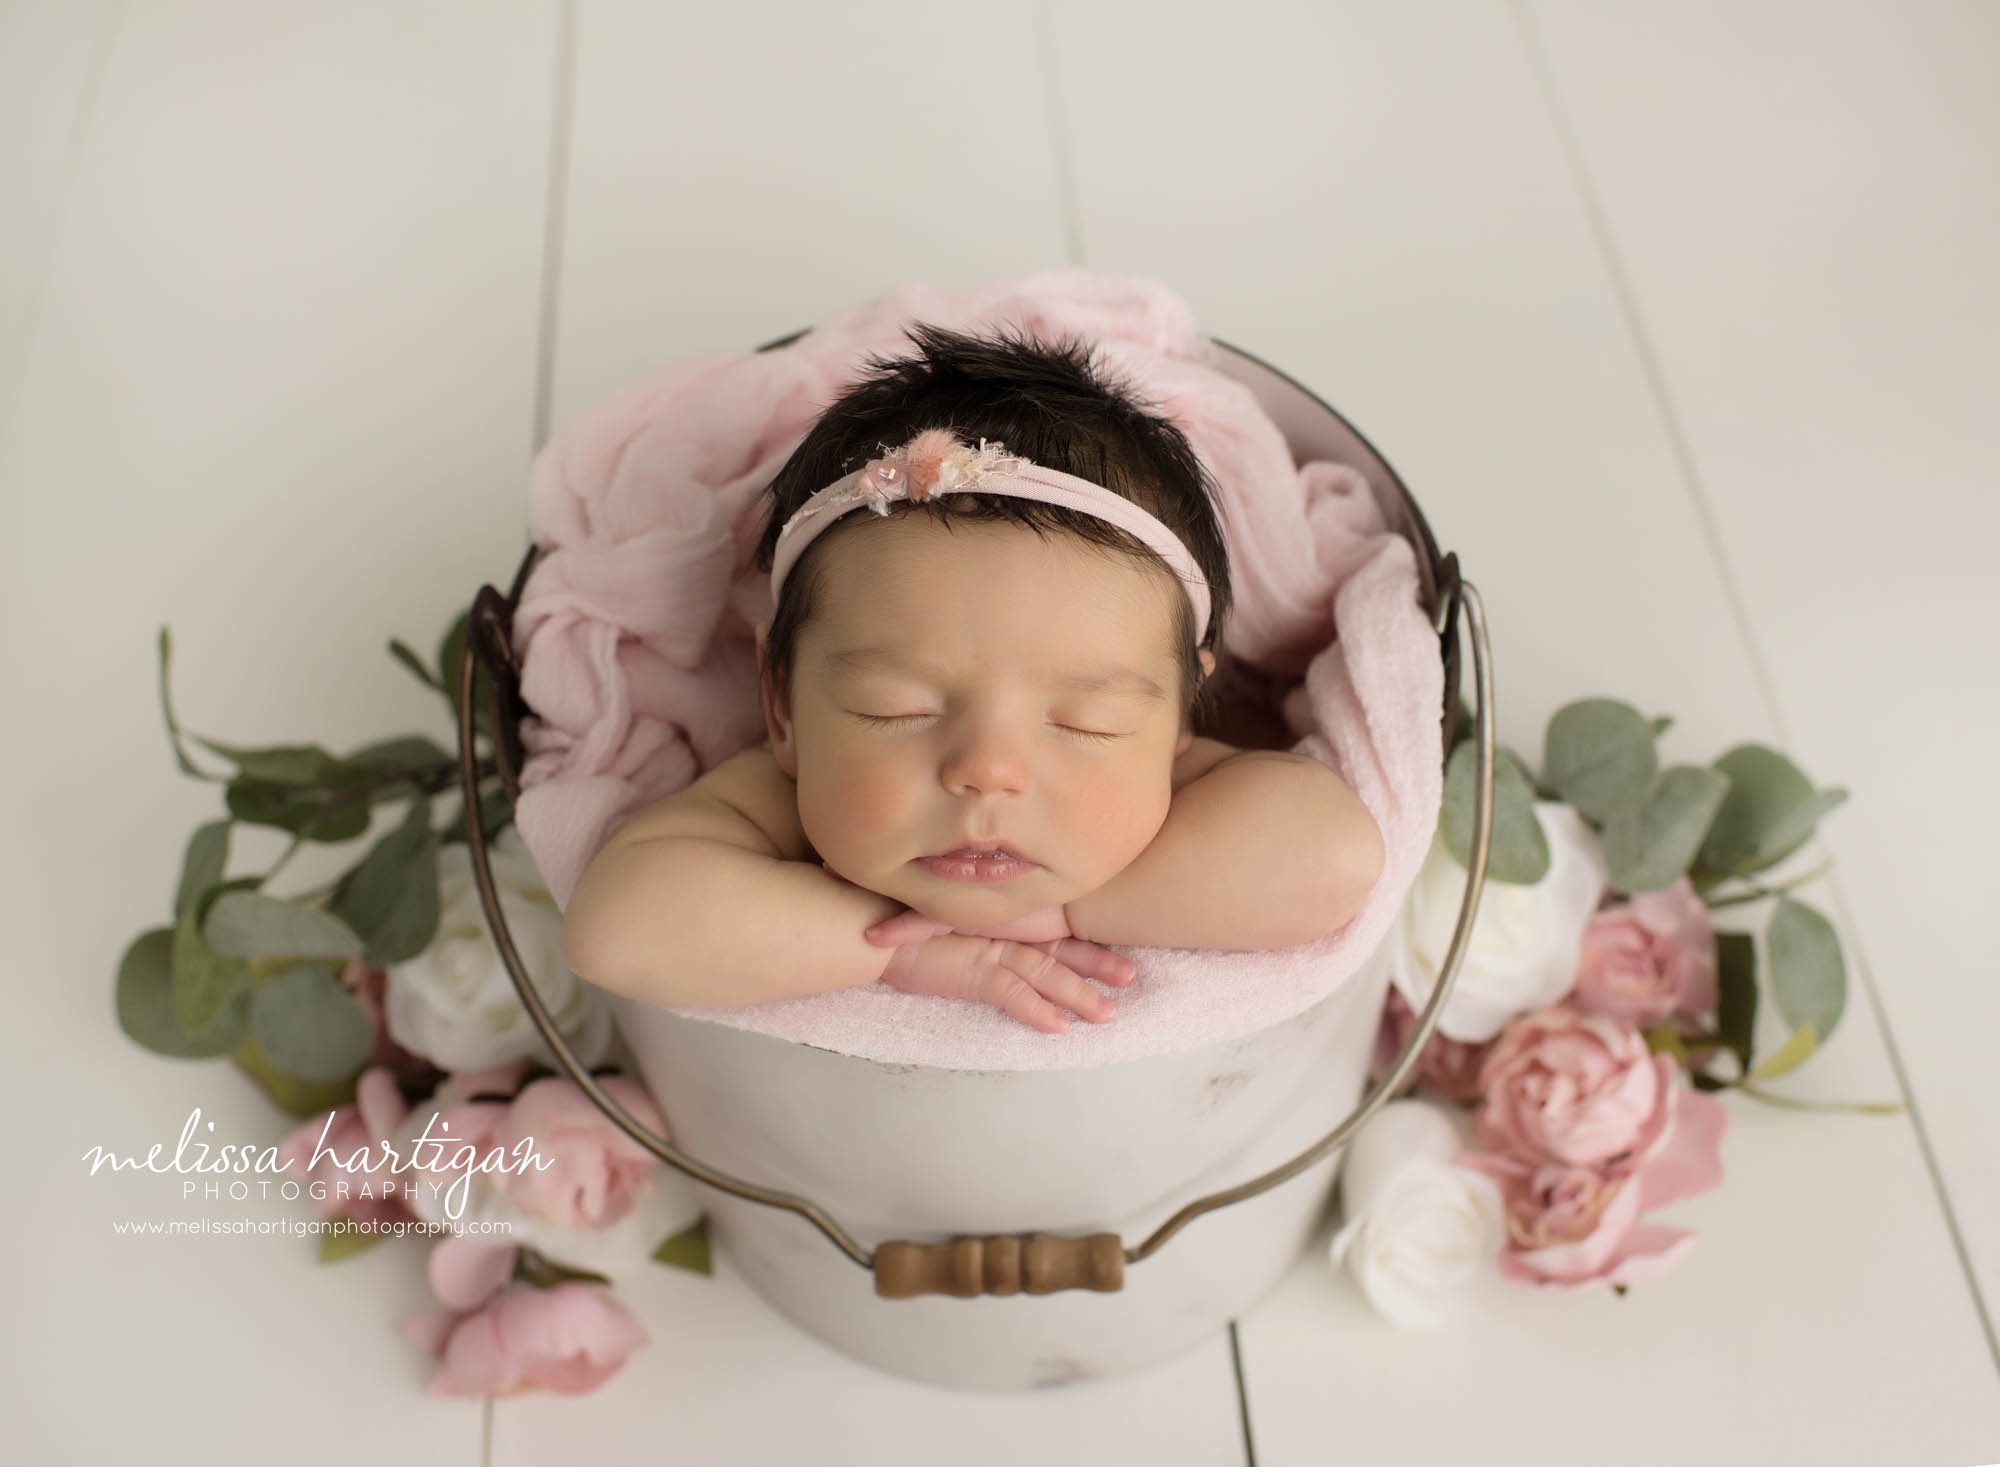 newborn baby girl posed in bucket with pink flowers